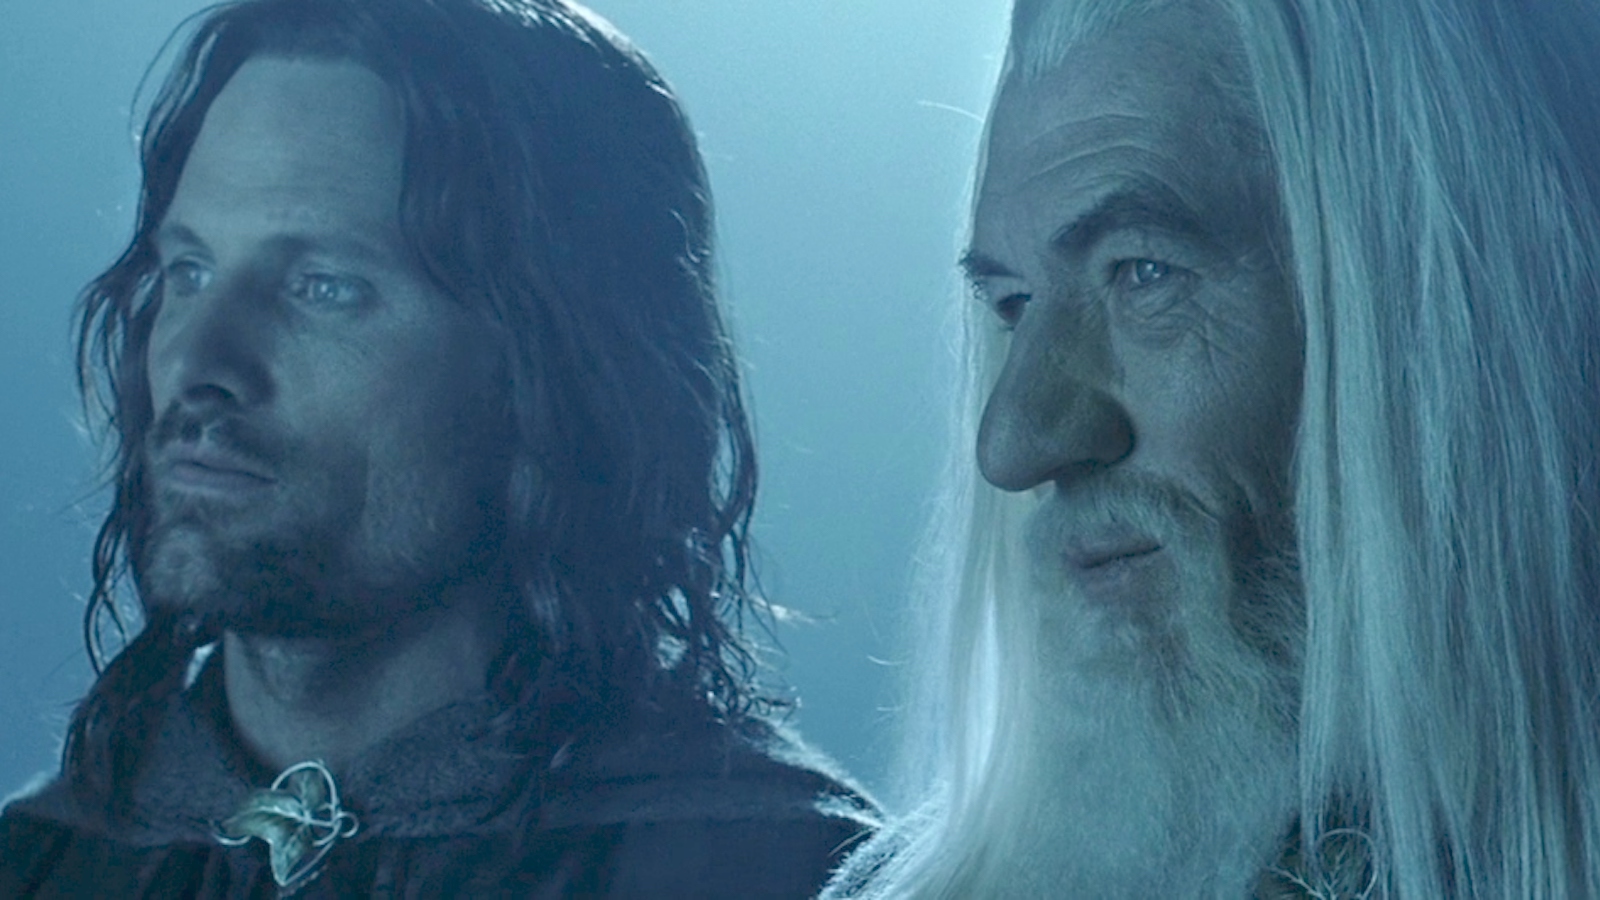 Arashigaoka Normaal gesproken Gedeeltelijk The Lord of the Rings' Spin-Off Films on Aragorn, Gollum, and More Could Be  Coming